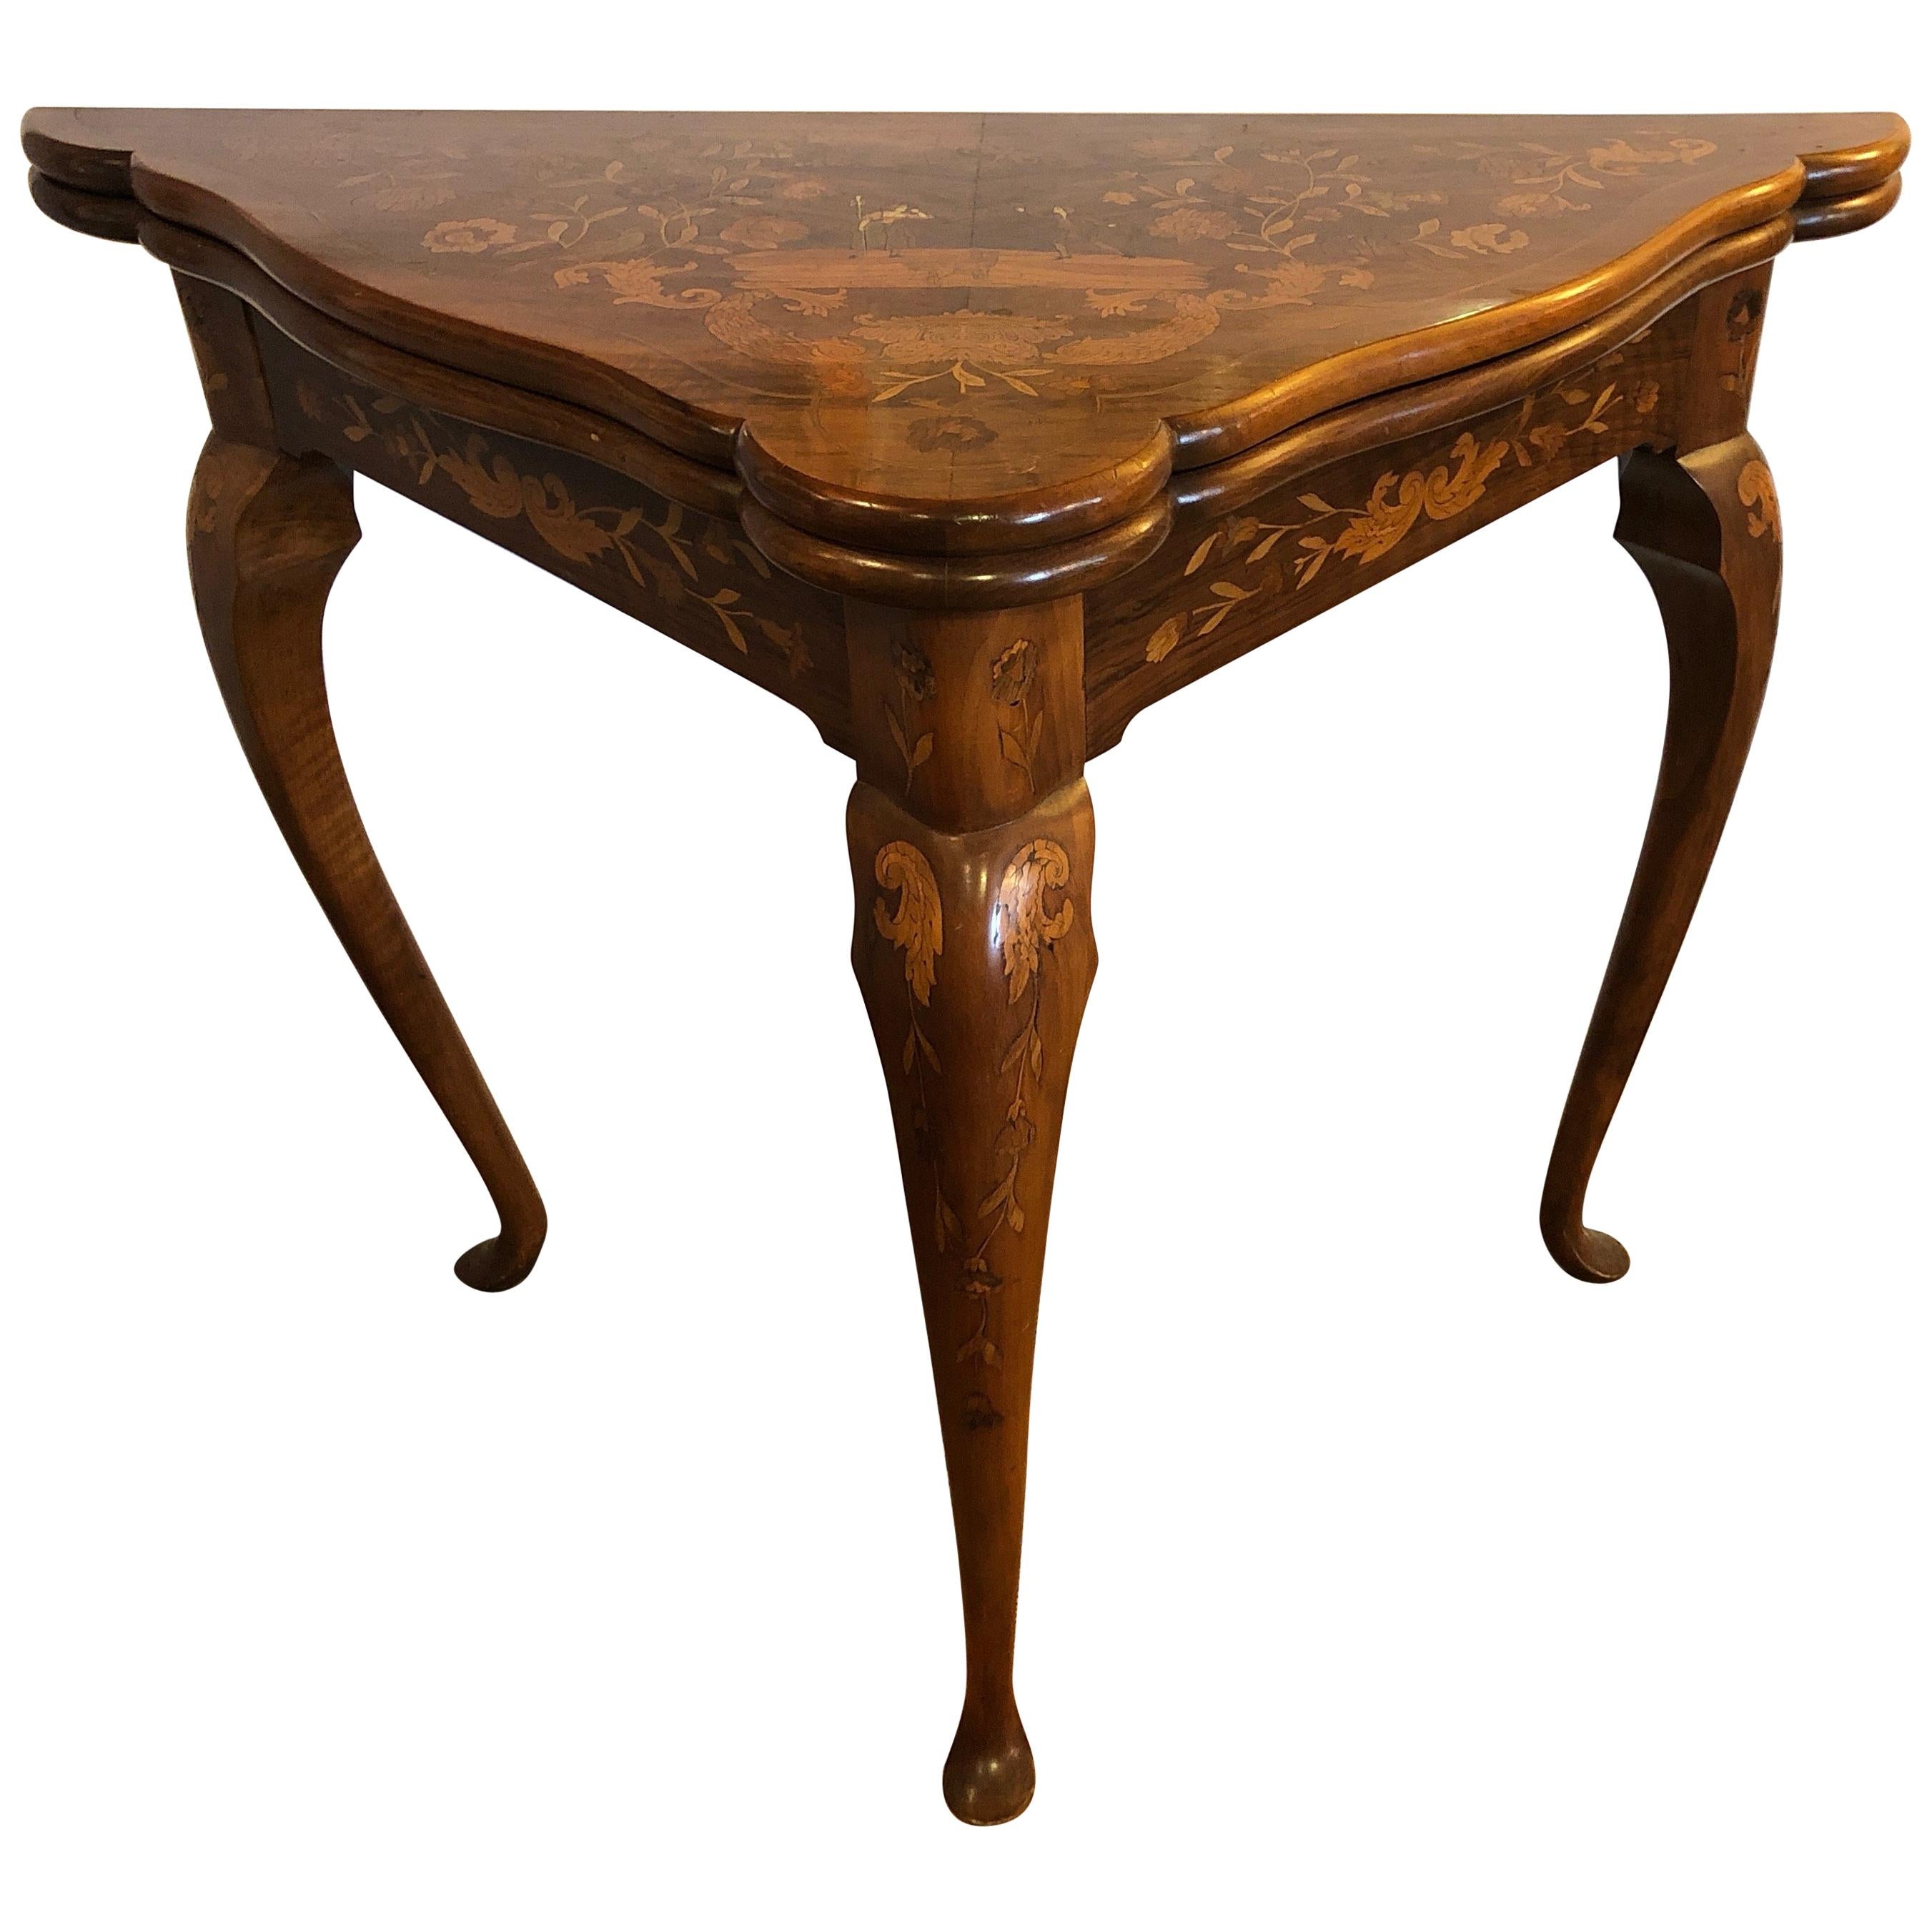 Lovely Triangular Mixed Wood Intricately Inlaid Table the Opens to Card Table